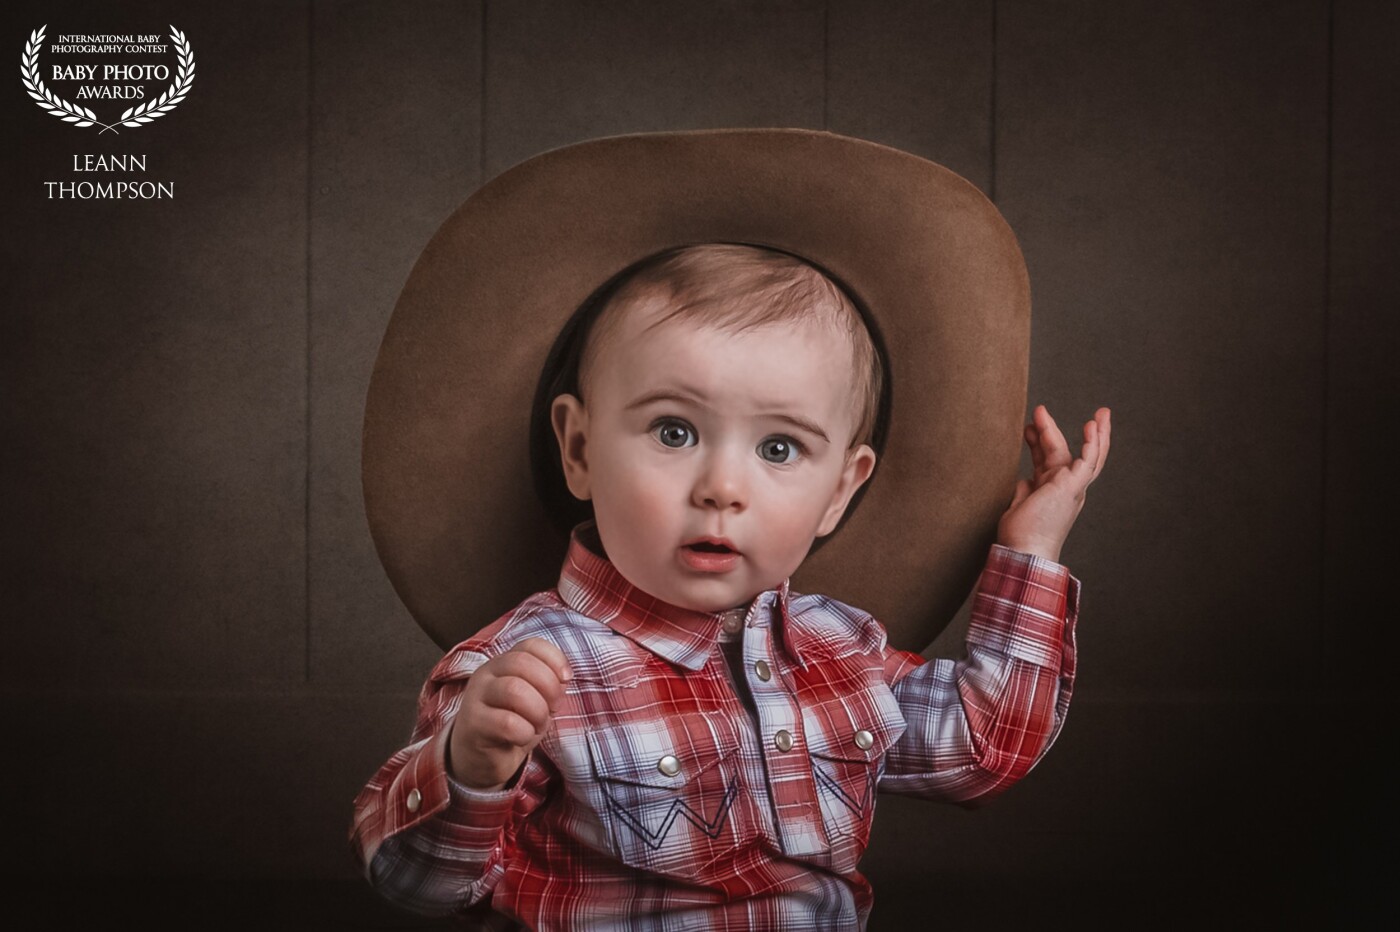 It's not easy being the cutest cowboy around..<br />
For his first birthday his gigi brought him in for some rodeo shots,<br />
who knew he would dazzle the camera like he did with those big cowboy blue eyes.